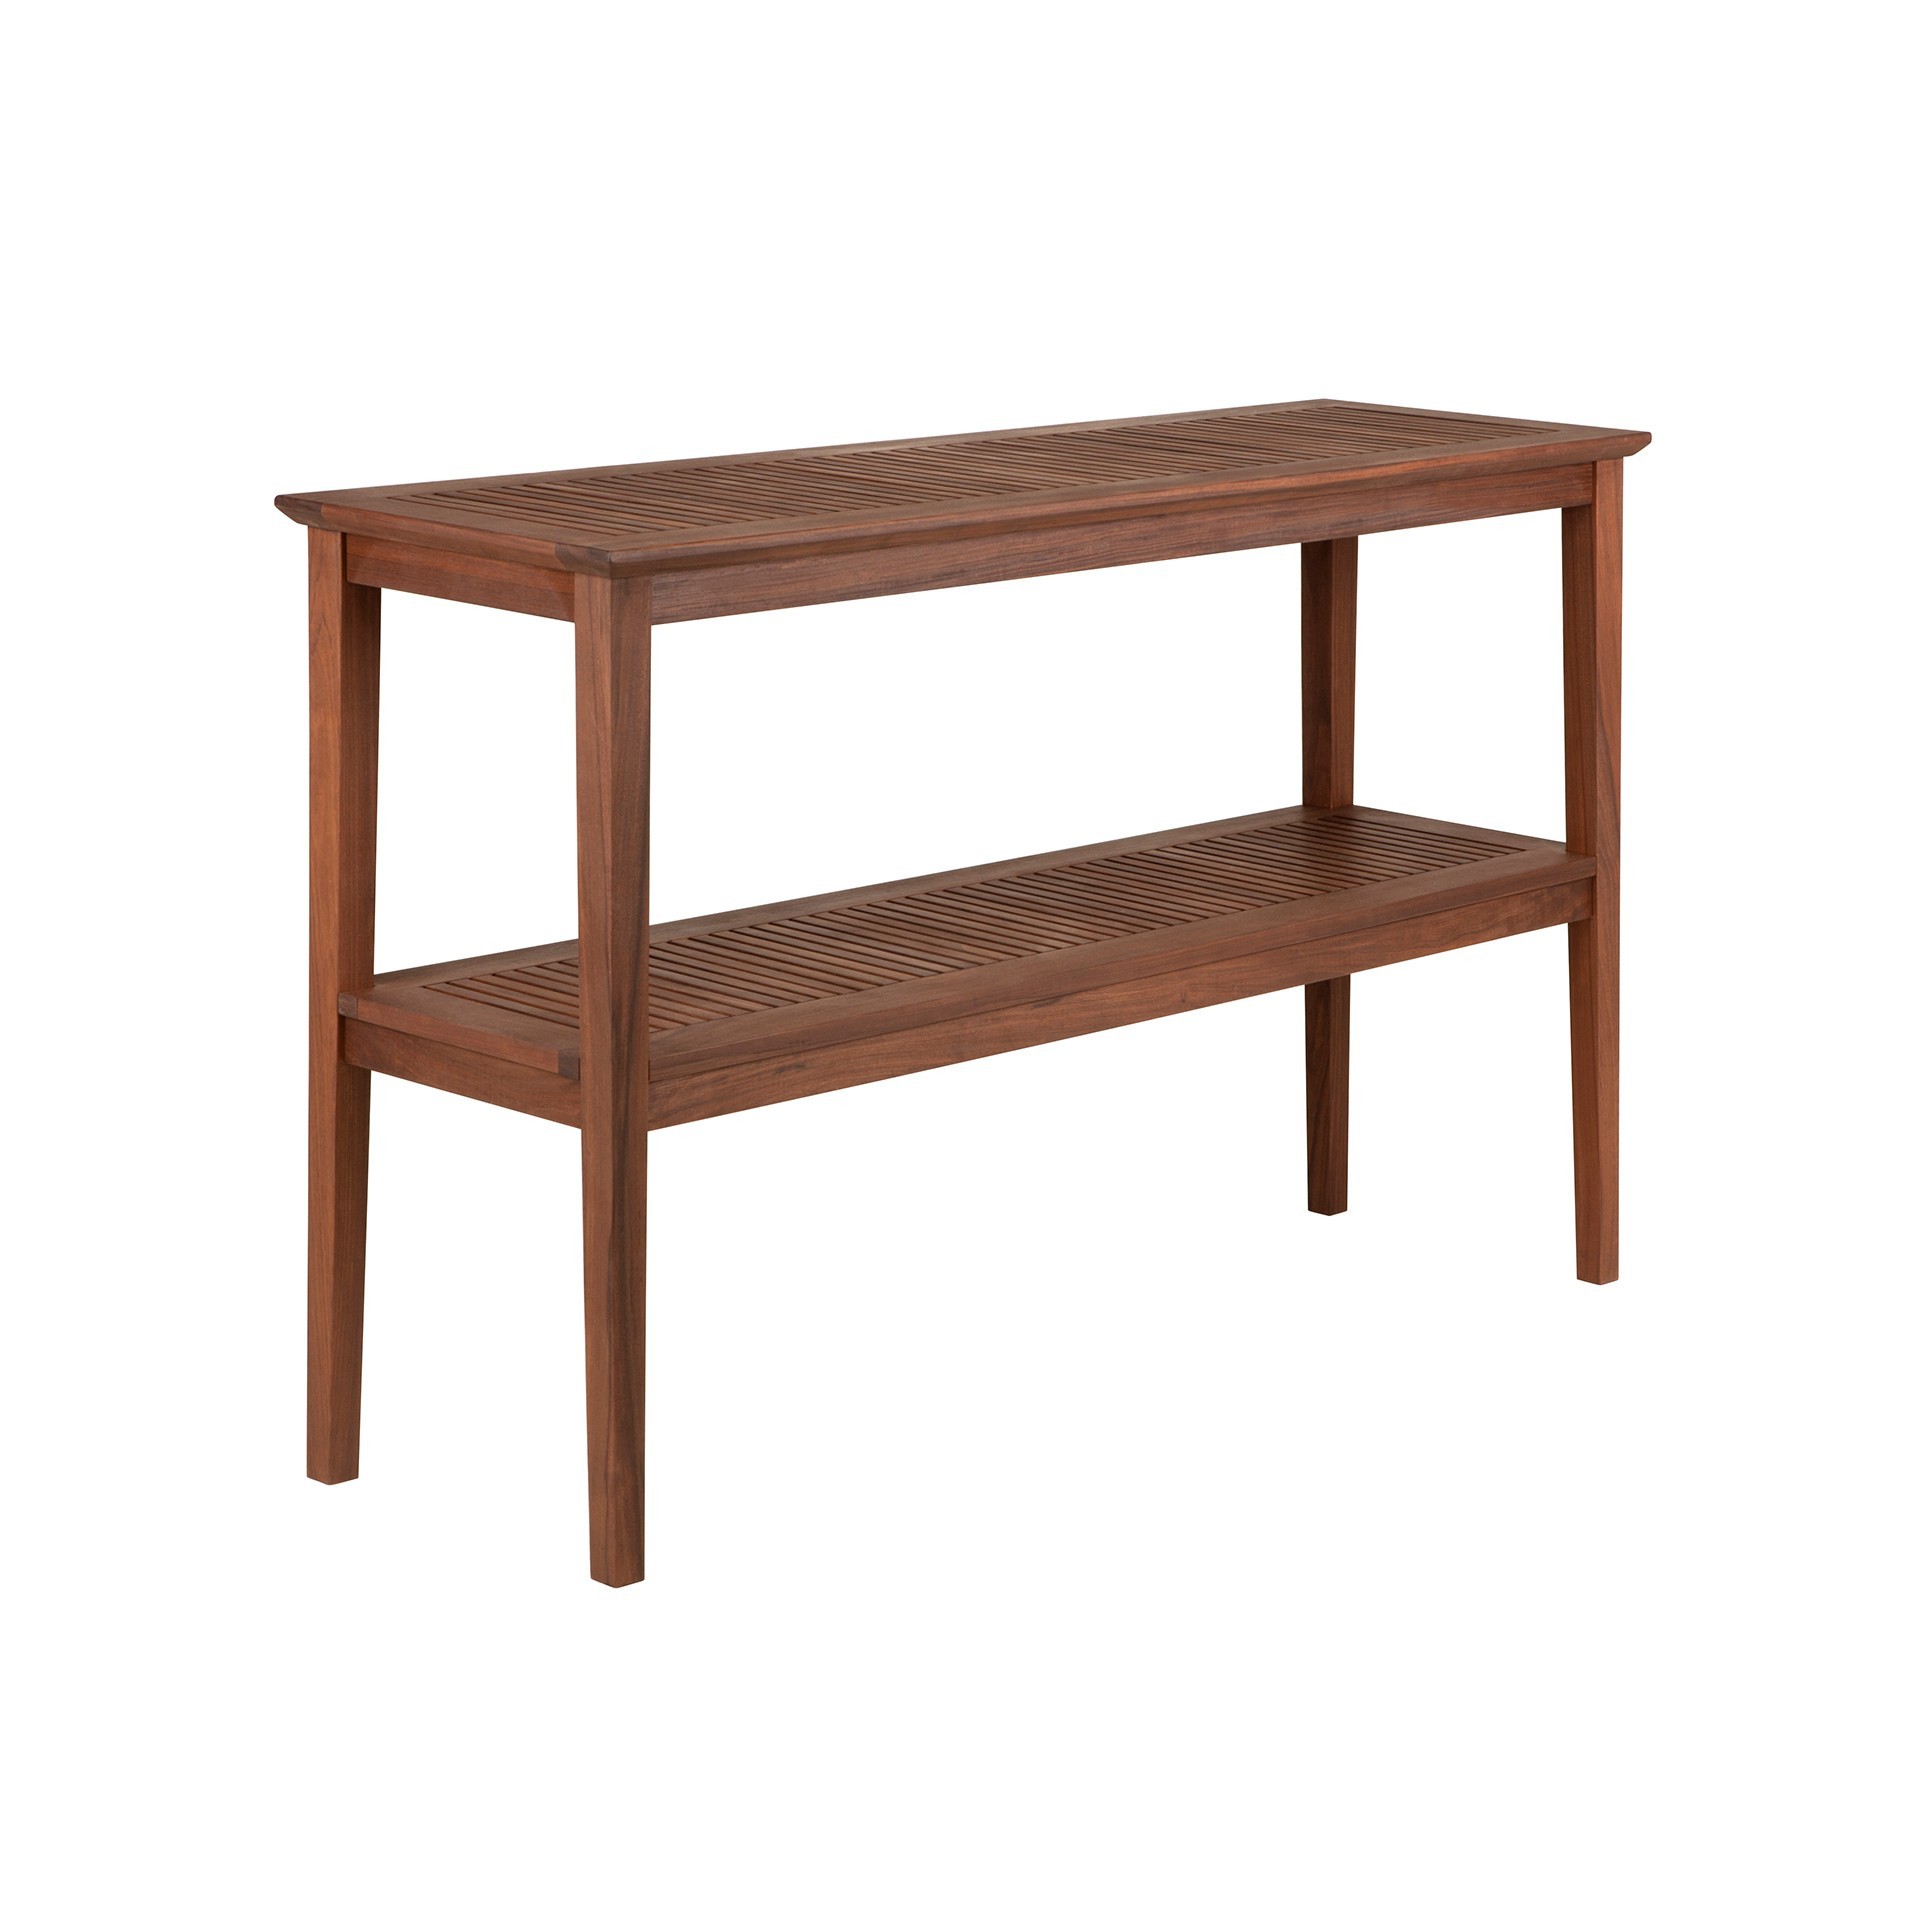 Opal console table from hausers patio luxury outdoor living by hausers patio